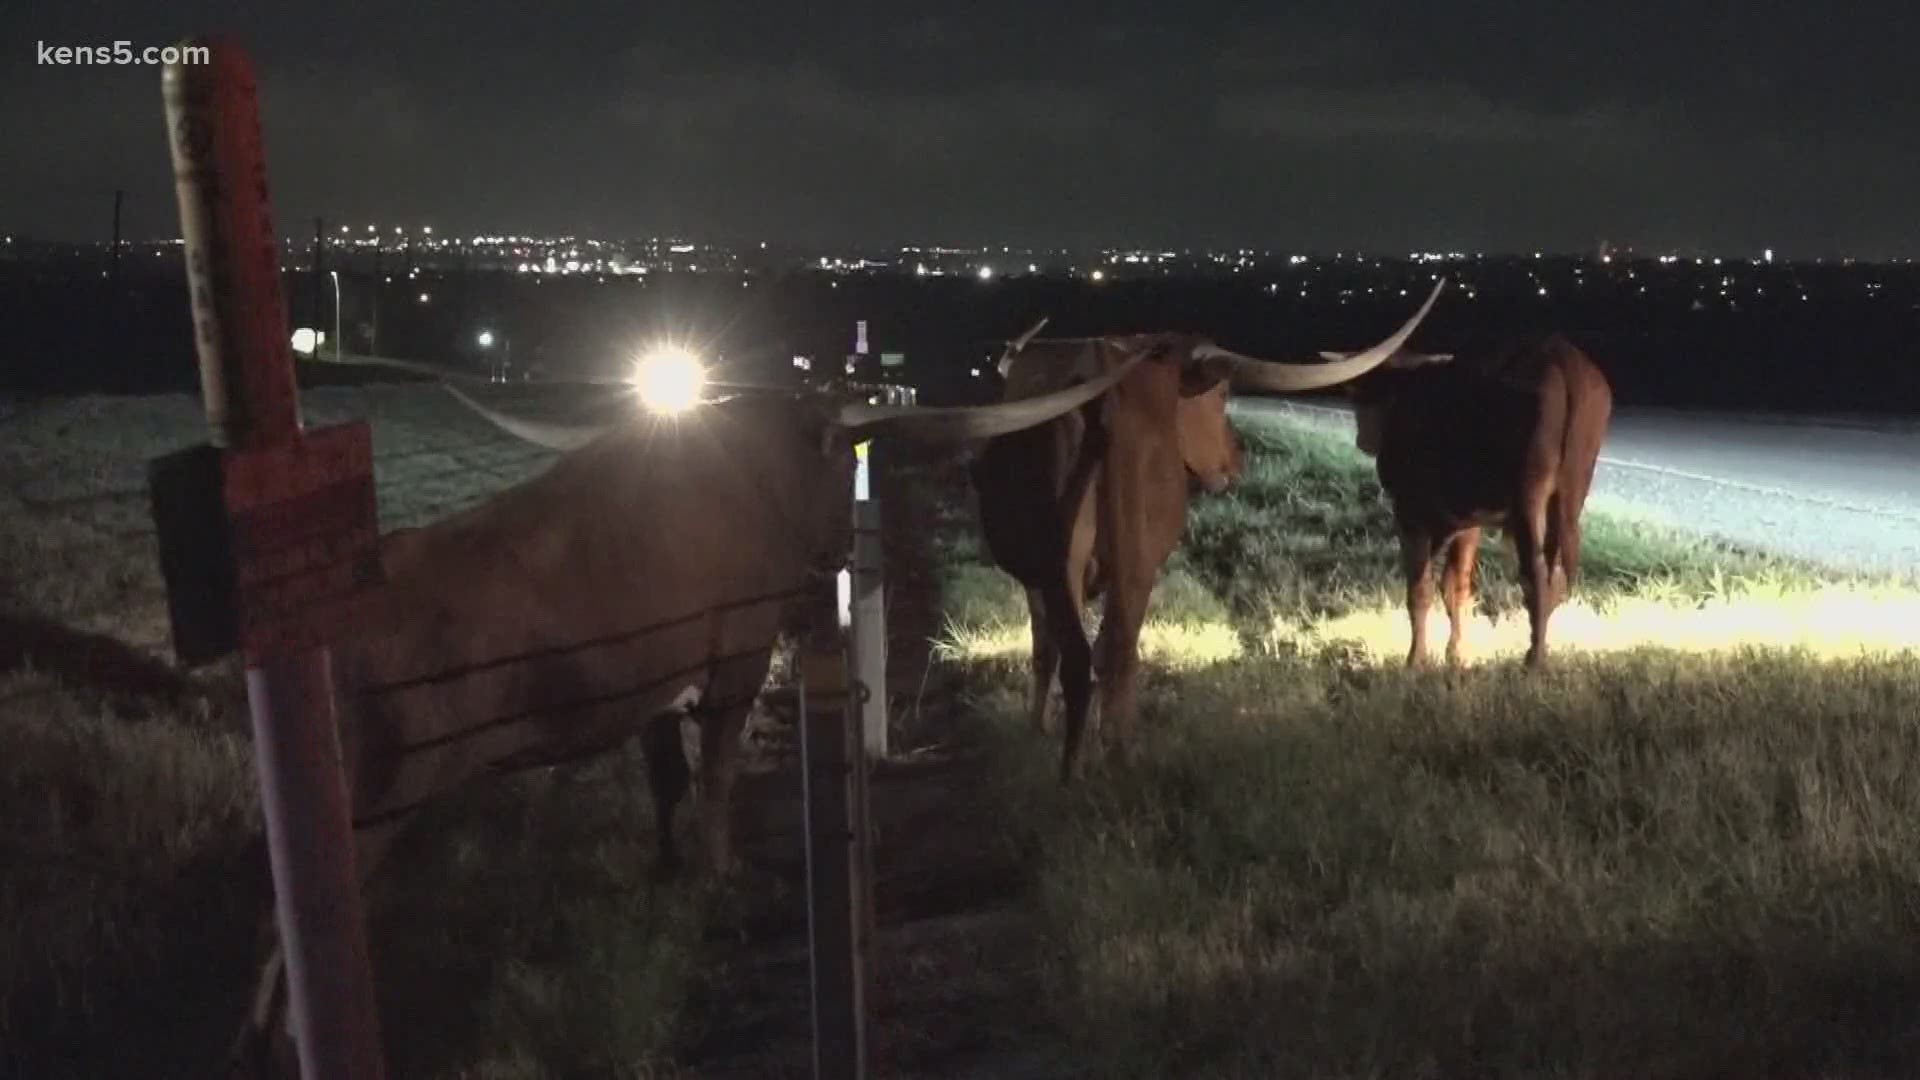 Early Friday morning, San Antonio police officers had to corral three longhorns off a major highway.